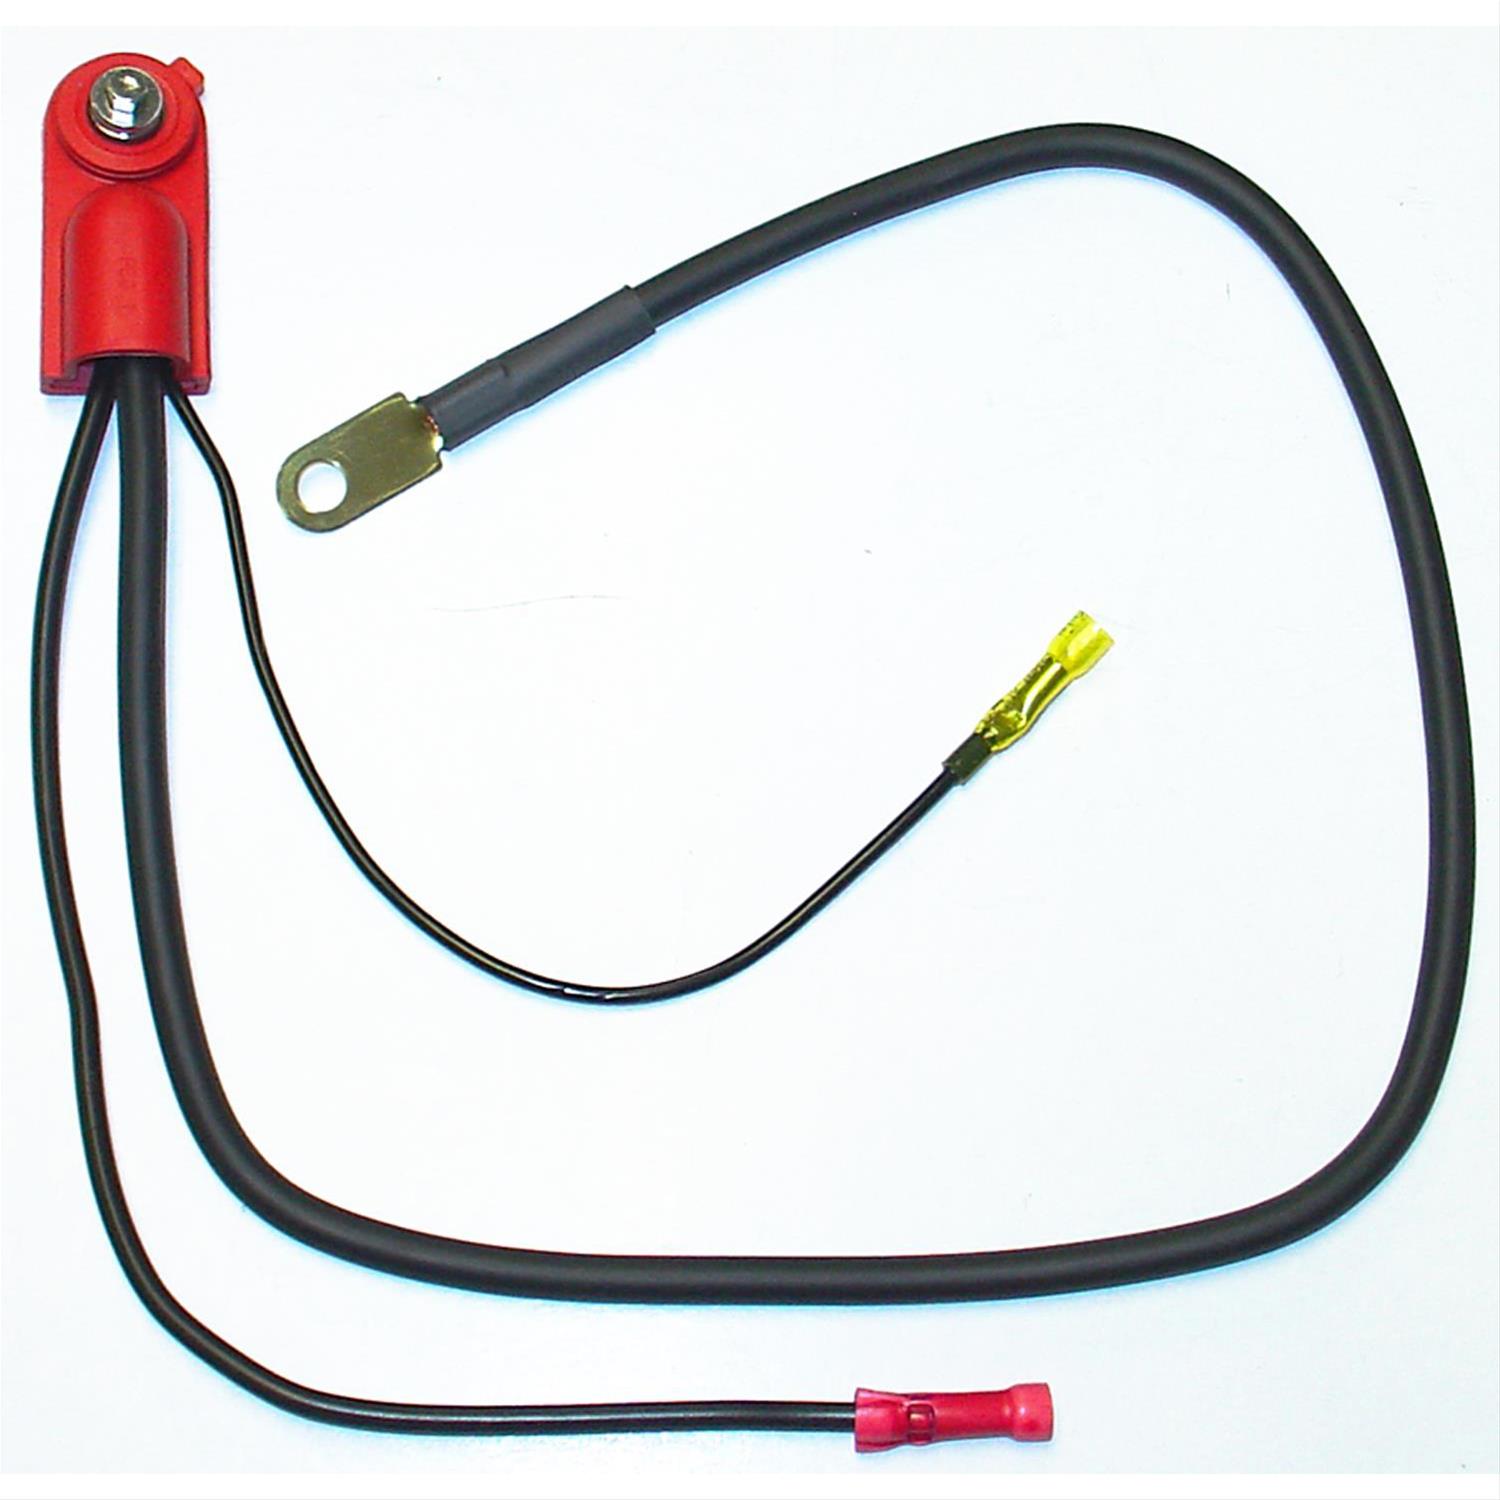 Battery cable. С320 Battery Cable. CDC Batt провод. ZTE с320 Battery Cable. Батарейный кабель (2m Battery Cable for Eaton 9130 EBM 3000 ).